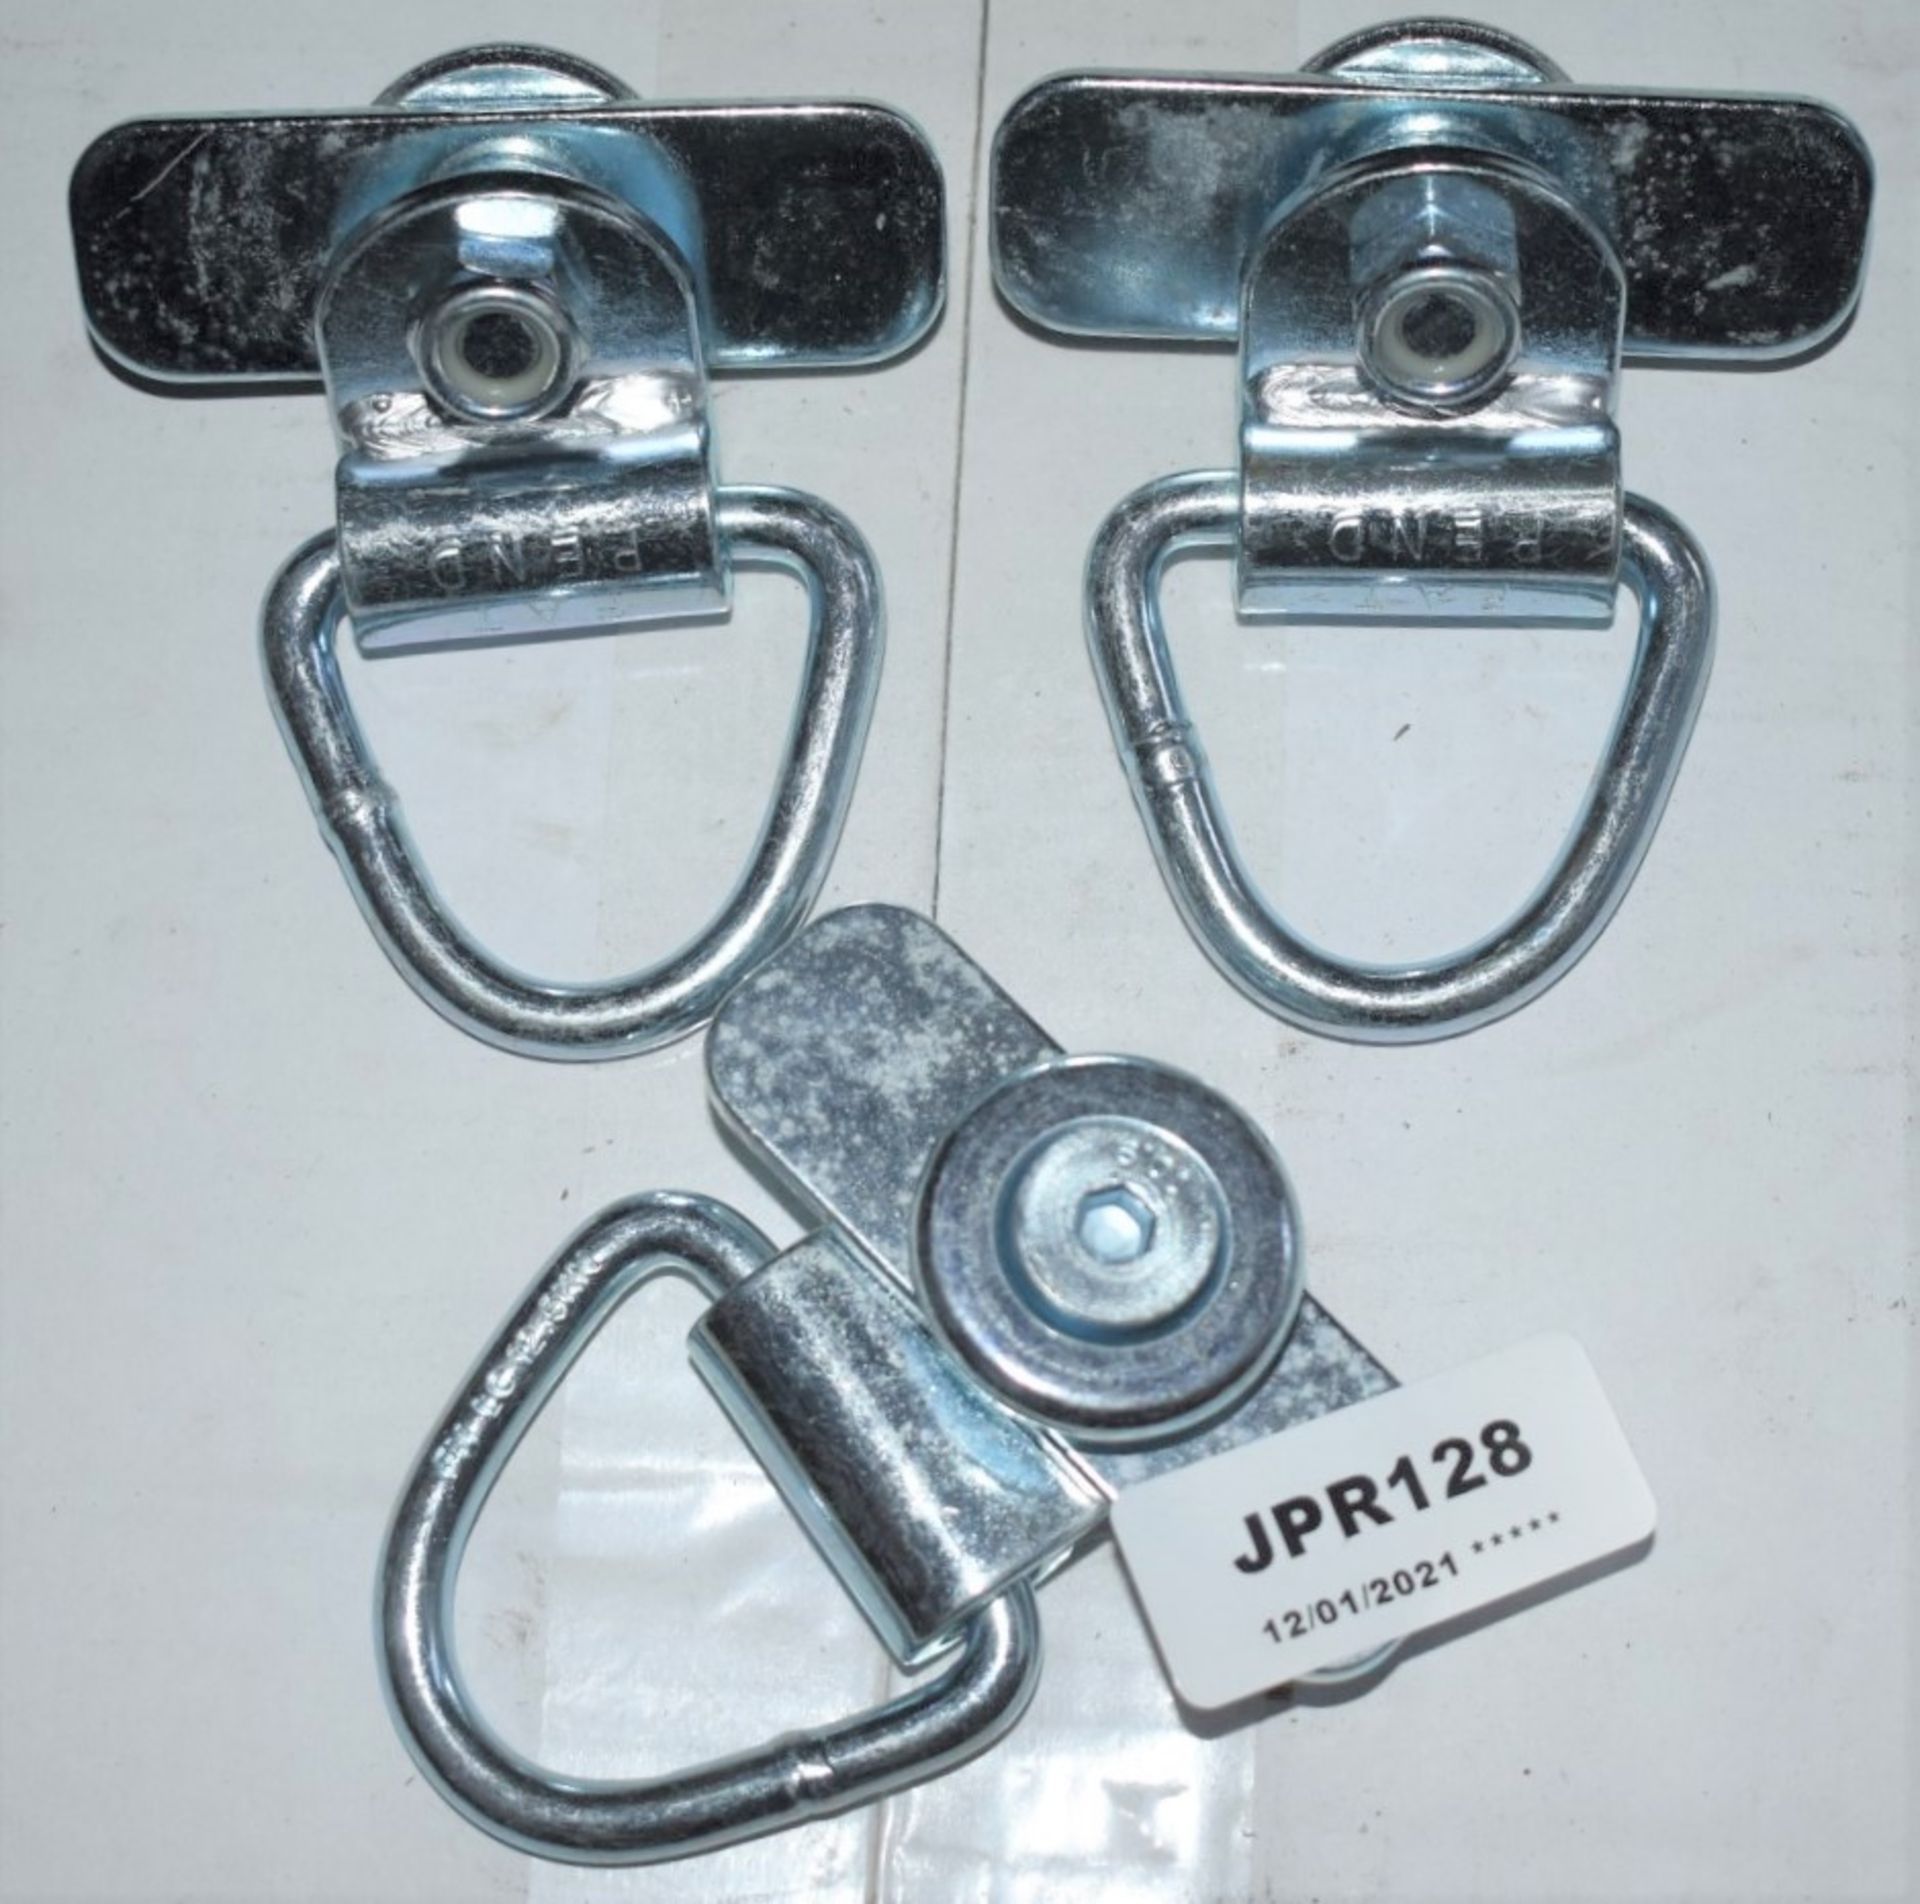 10 x Swivel D Ring Brackets For Truck Beds, Vans, Boats etc - Part No CS7 - New and Unused - CL622 - - Image 2 of 5